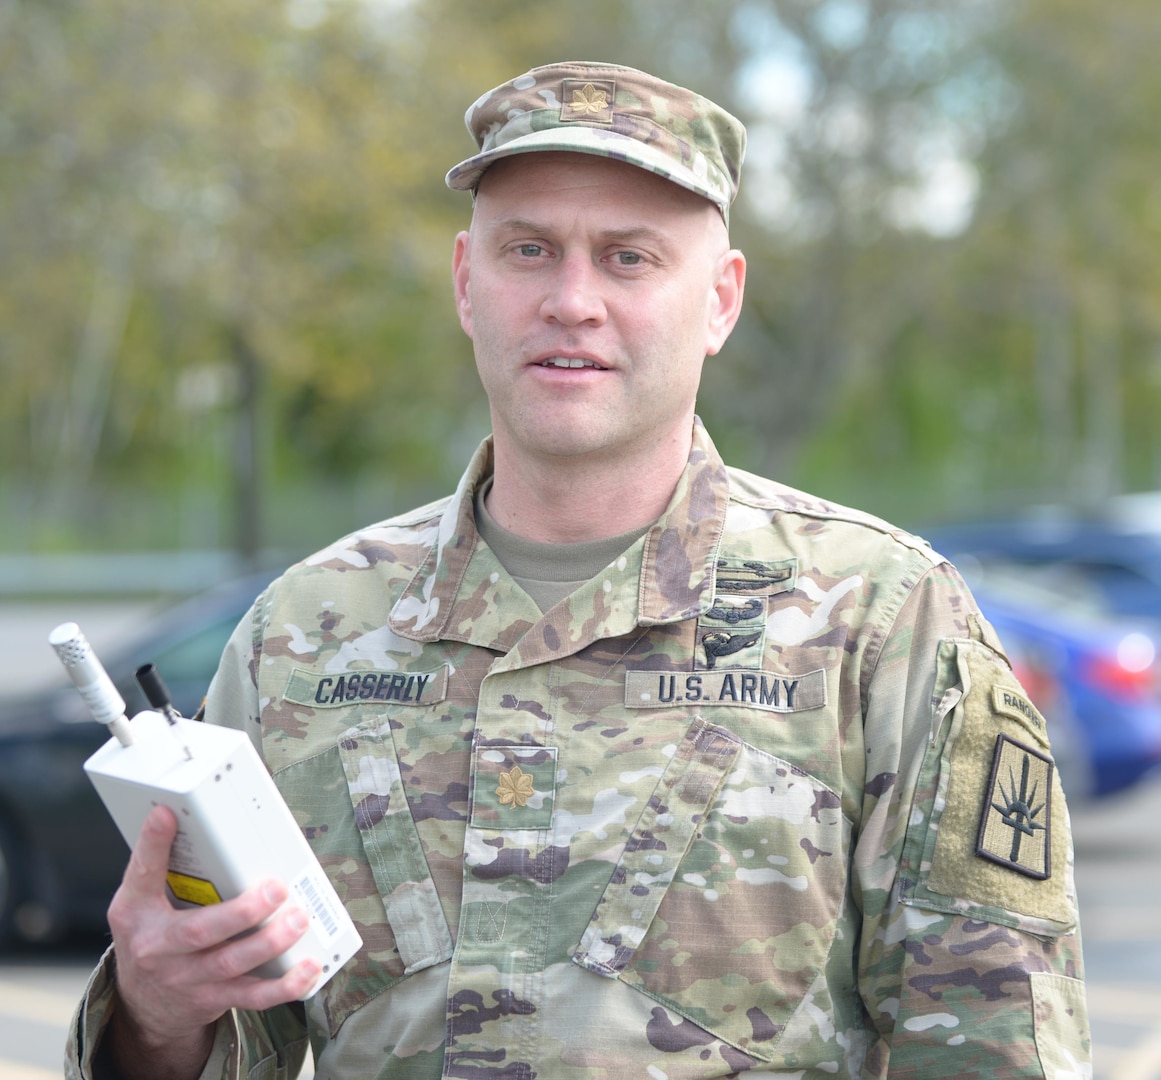 New York Army National Guard Major Keith Casserly with the atmospheric sampler he used to conduct a study of particulate air pollution along bus routes  in Albany, N.Y.  outside New York National Guard headquarters in Latham on May 15, 2019. Casserly conducted the study as part of his studfies toward a Masters in Public Health and was recognized by the State University of New York, Albany, with an award for Excellence in Scholarship.